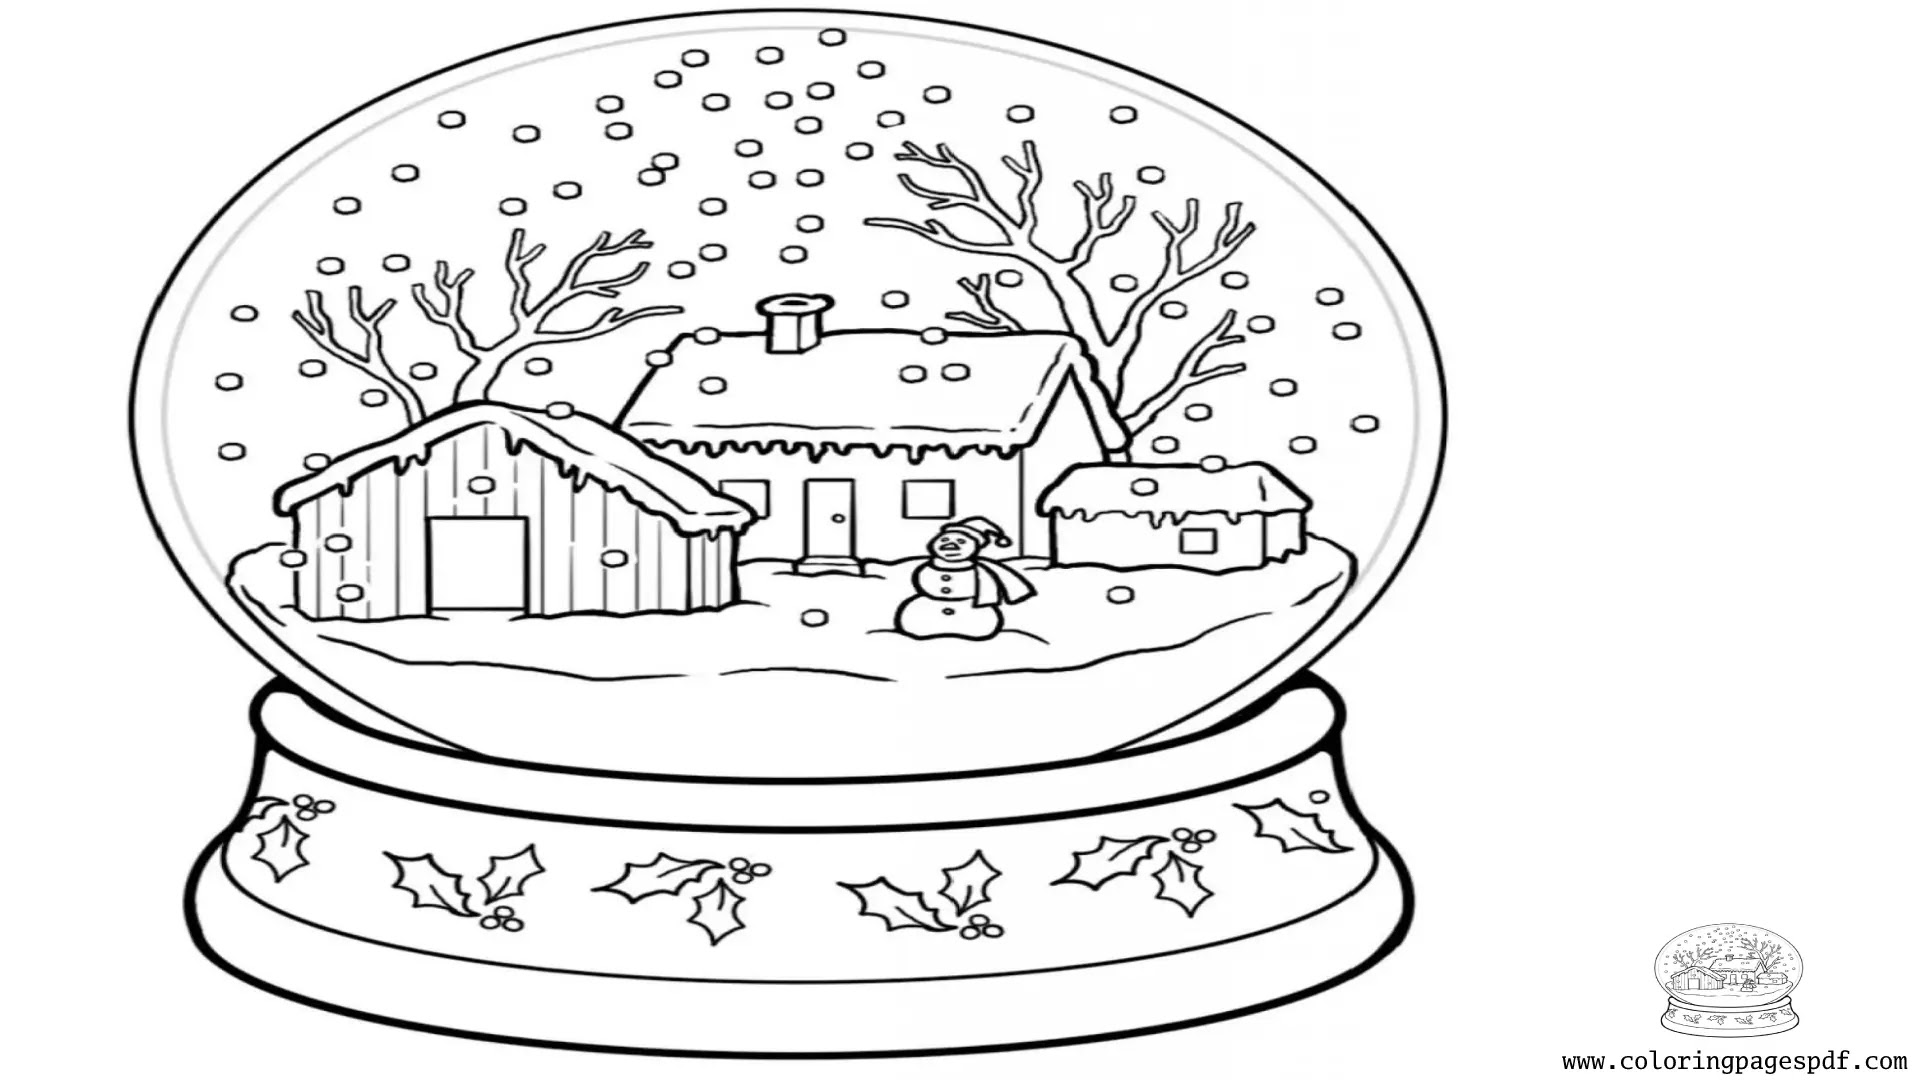 Coloring Page Of A Christmas Snowball